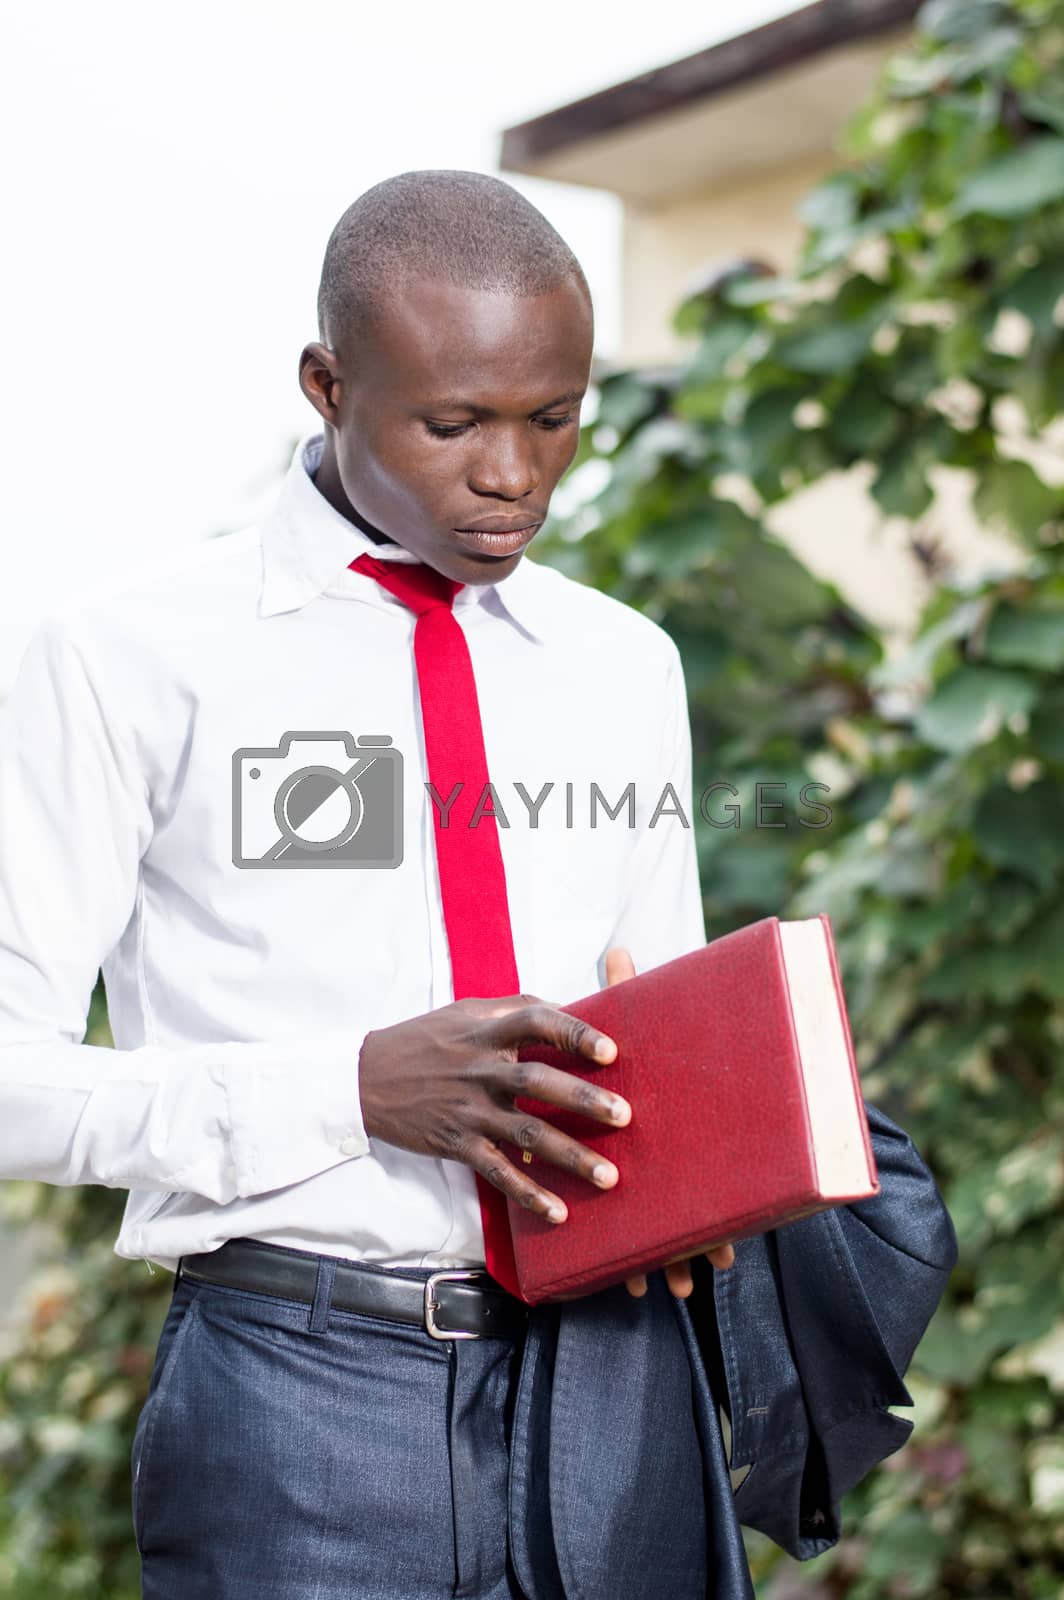 Royalty free image of Young student holding a book. by vystek